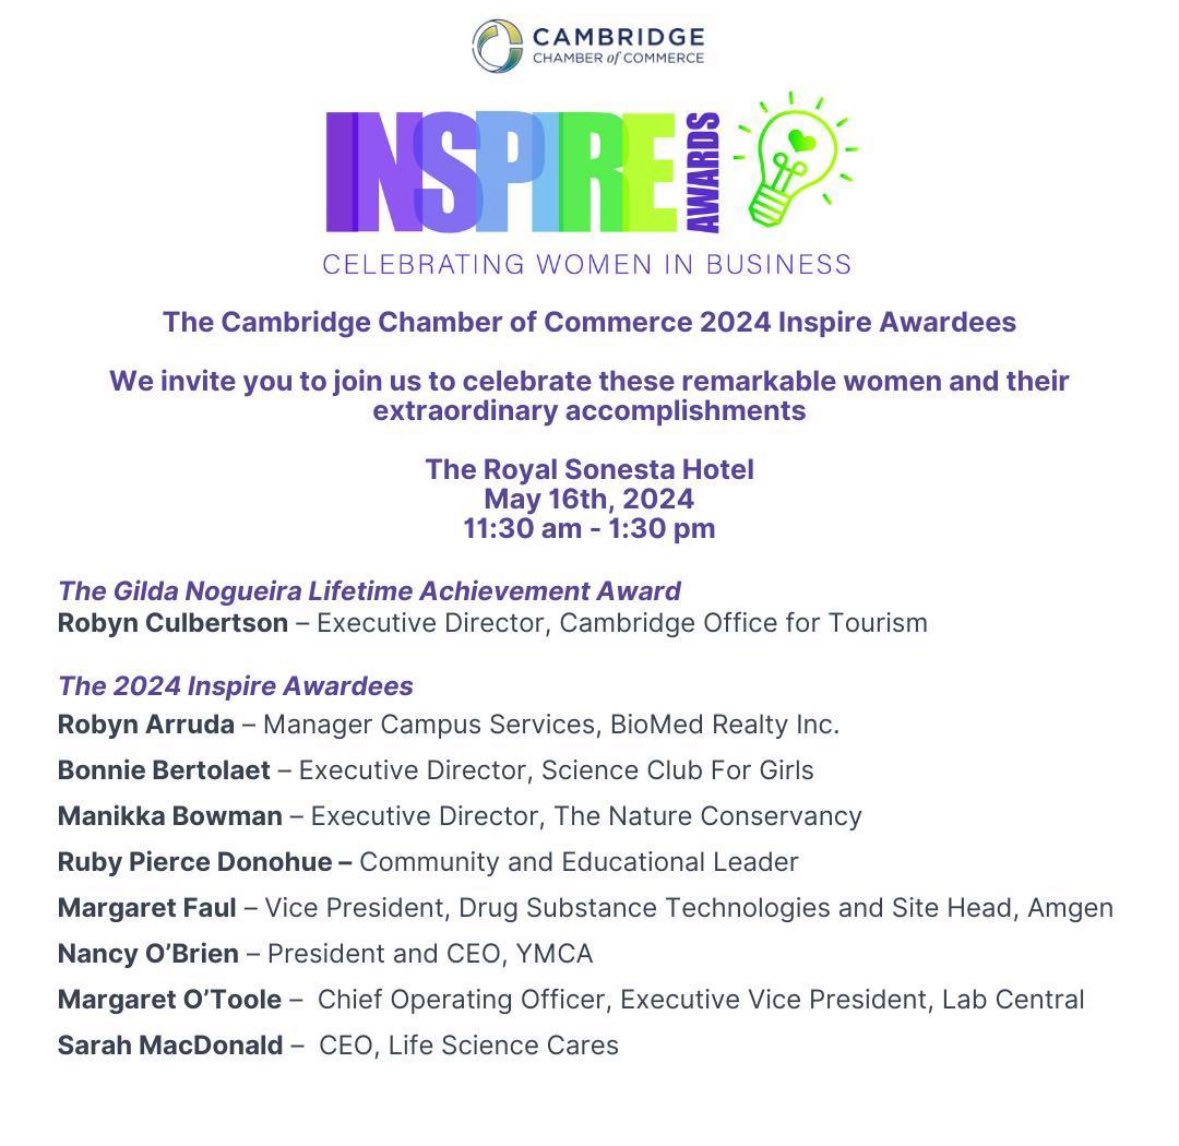 We are pleased to announce our 2024 Inspire Awardees! Join us in celebrating these wonderful women on May 16th. Link to register: business.cambridgechamber.org/events/details… #inspire #women #leaders #business #cambridge